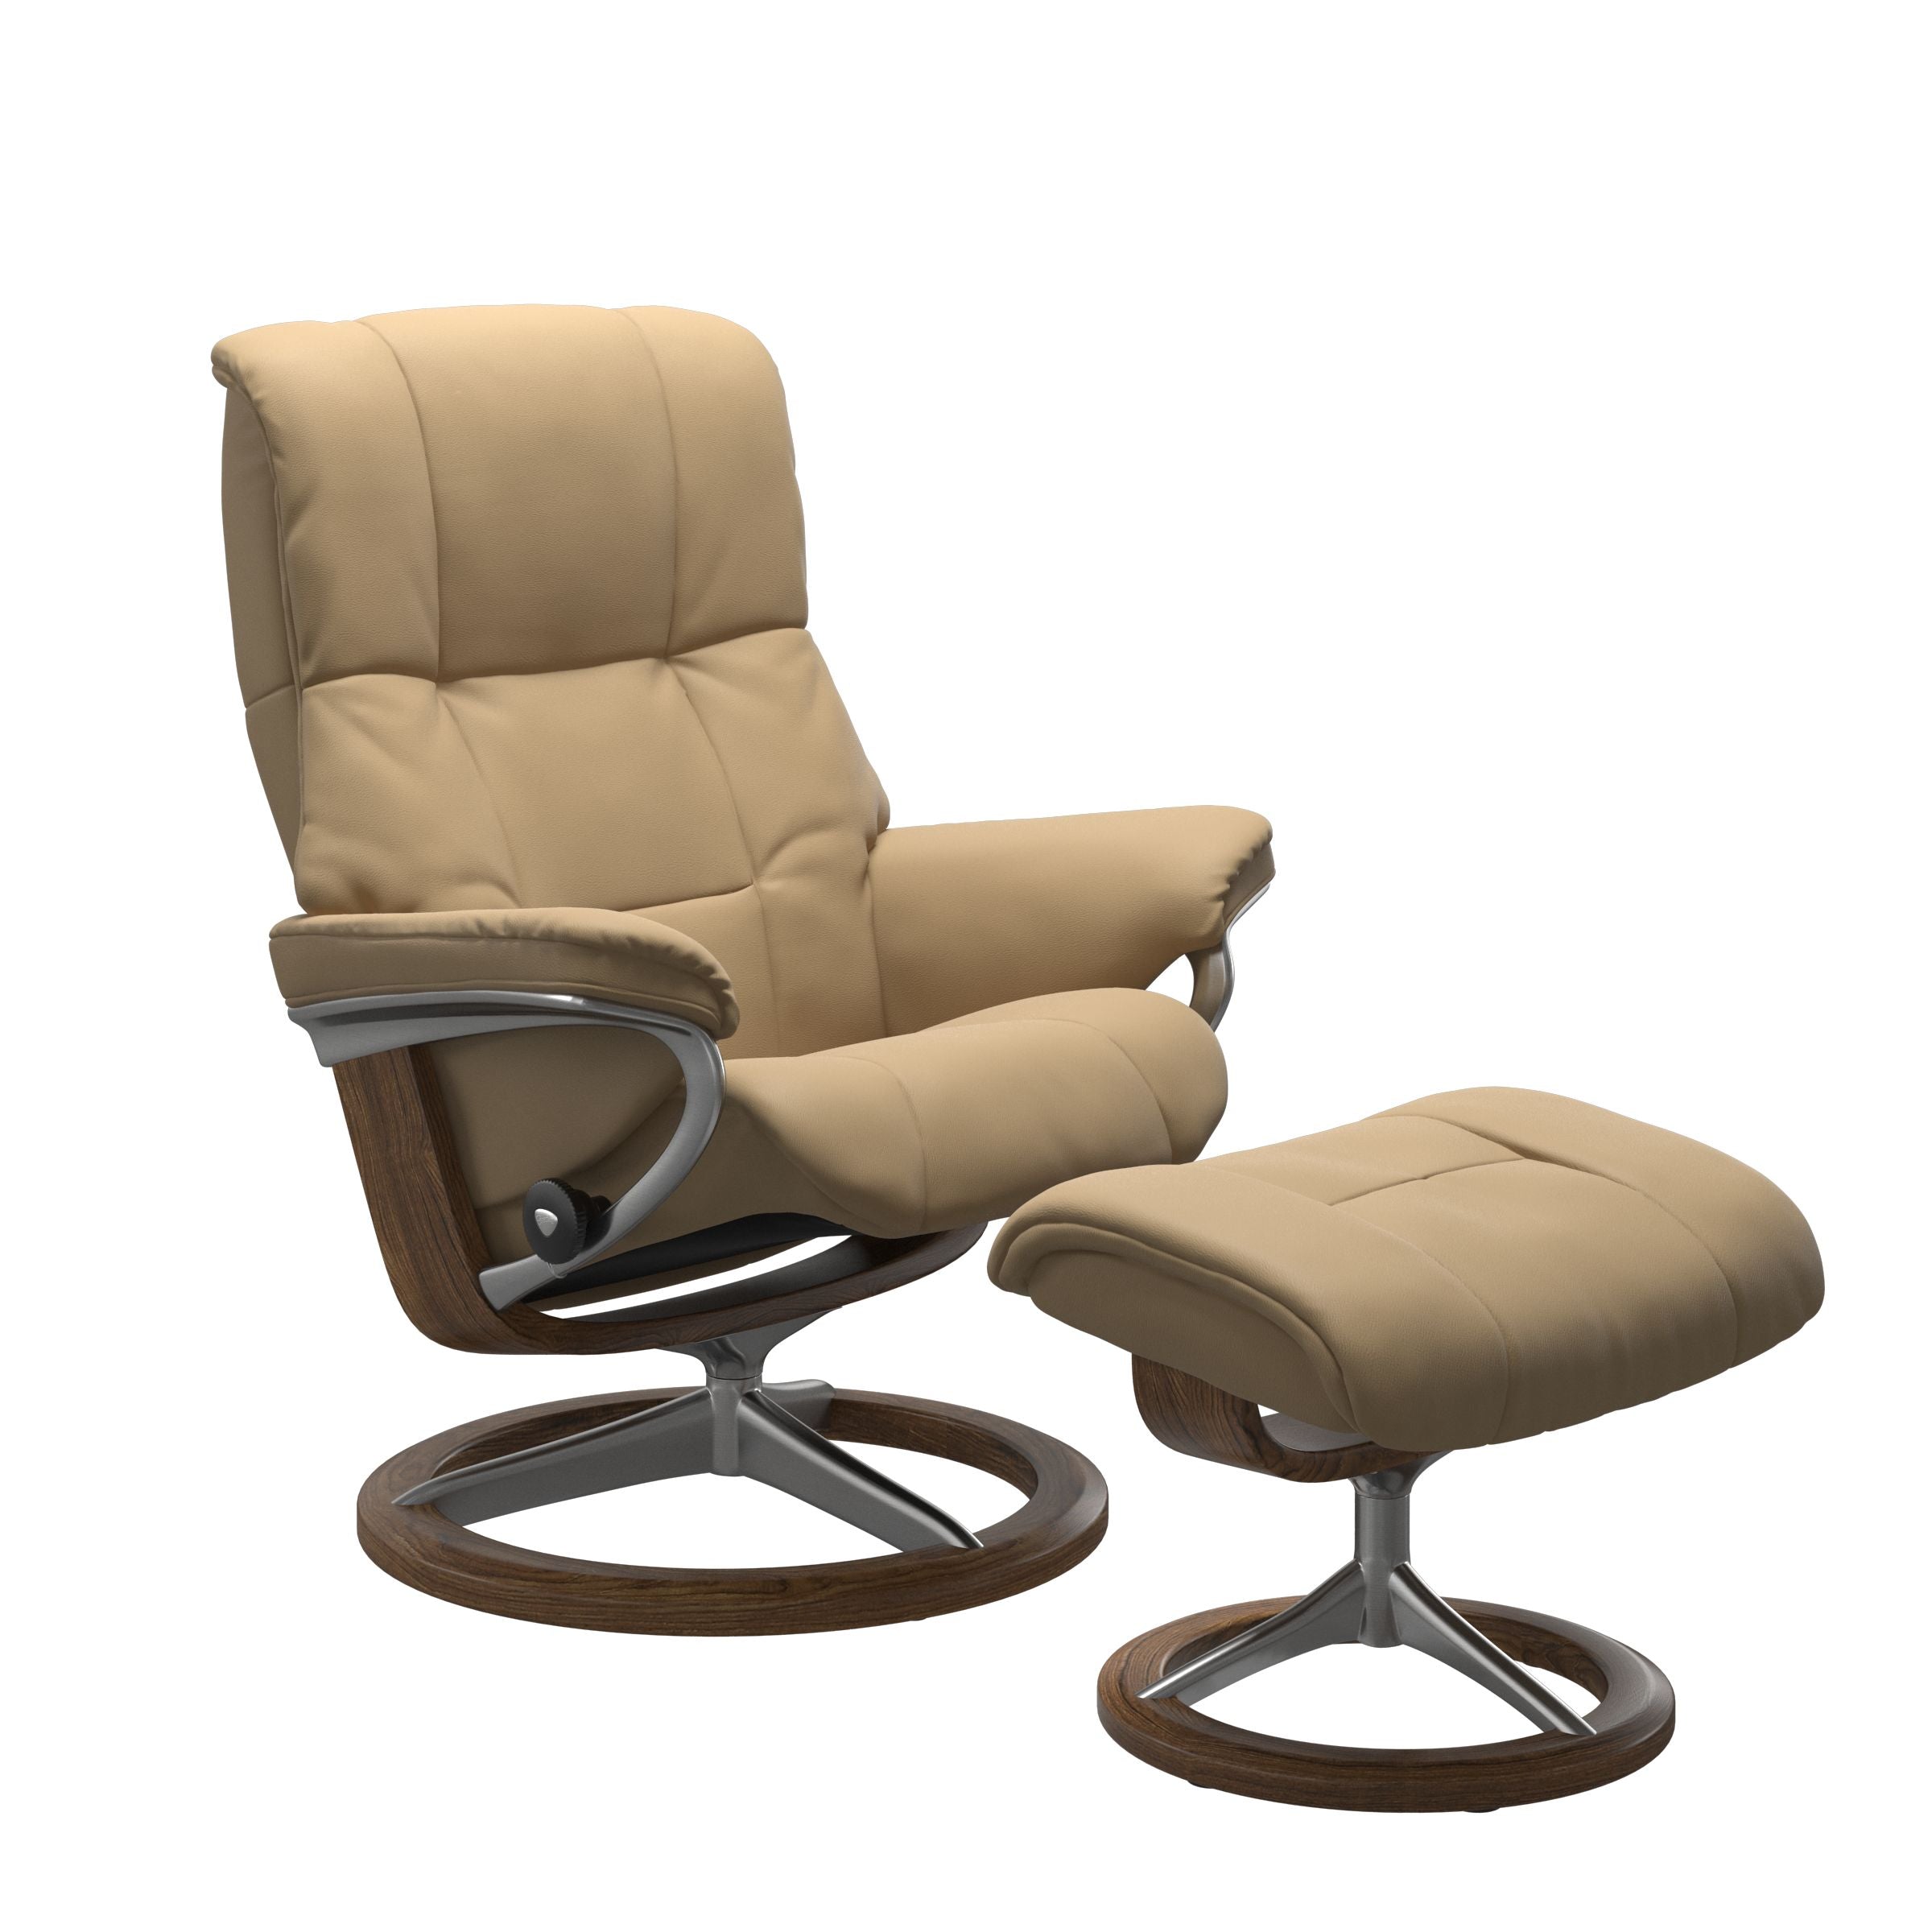 Stressless Mayfair Small Recliner and Ottoman with Signature Base